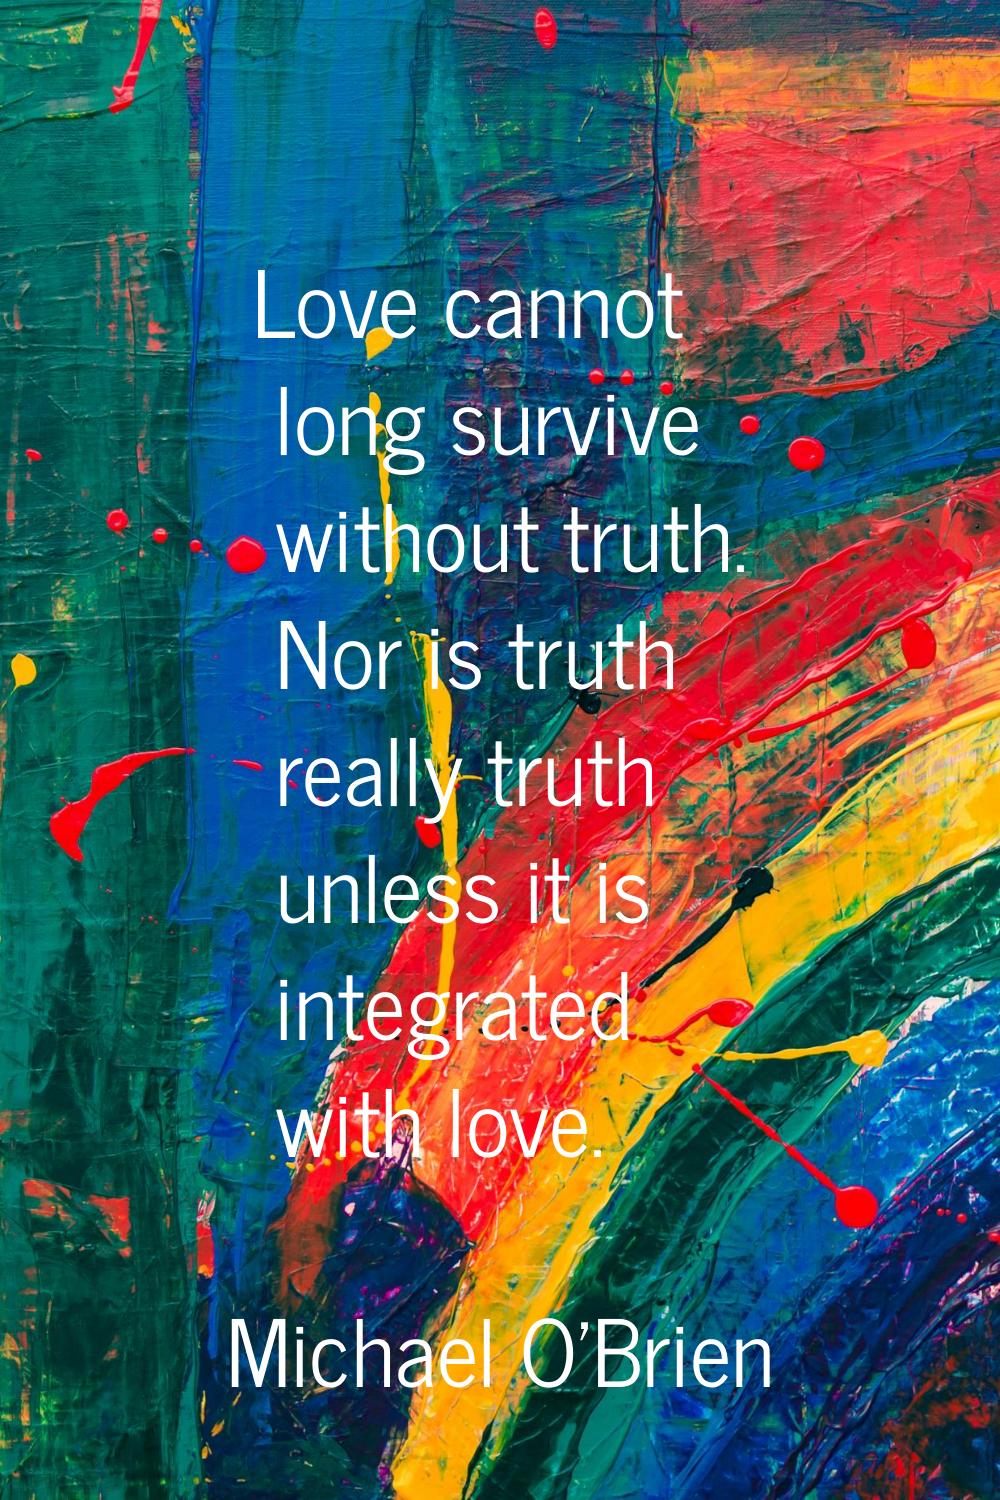 Love cannot long survive without truth. Nor is truth really truth unless it is integrated with love